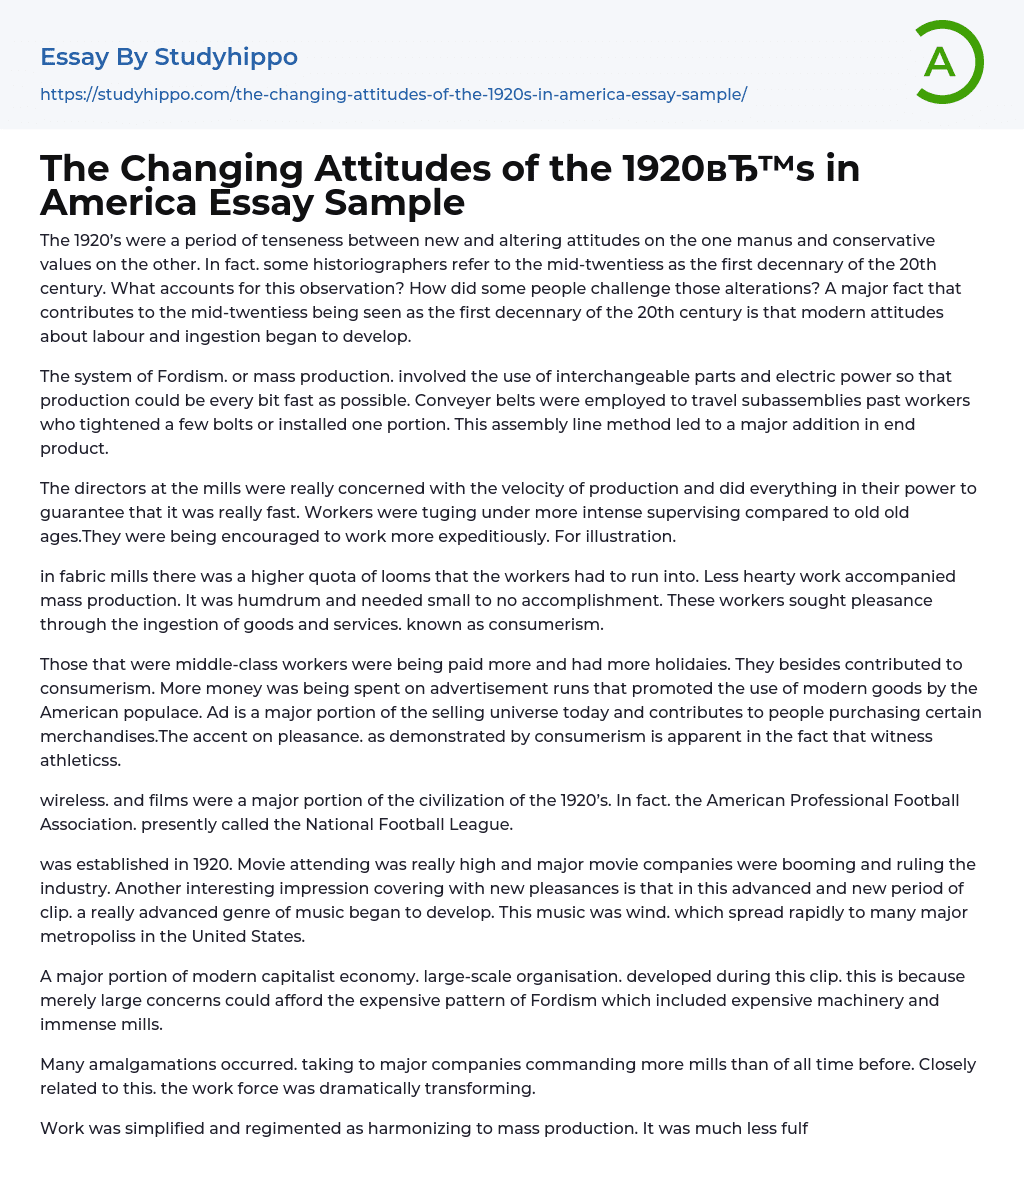 The Changing Attitudes of the 1920’s in America Essay Sample